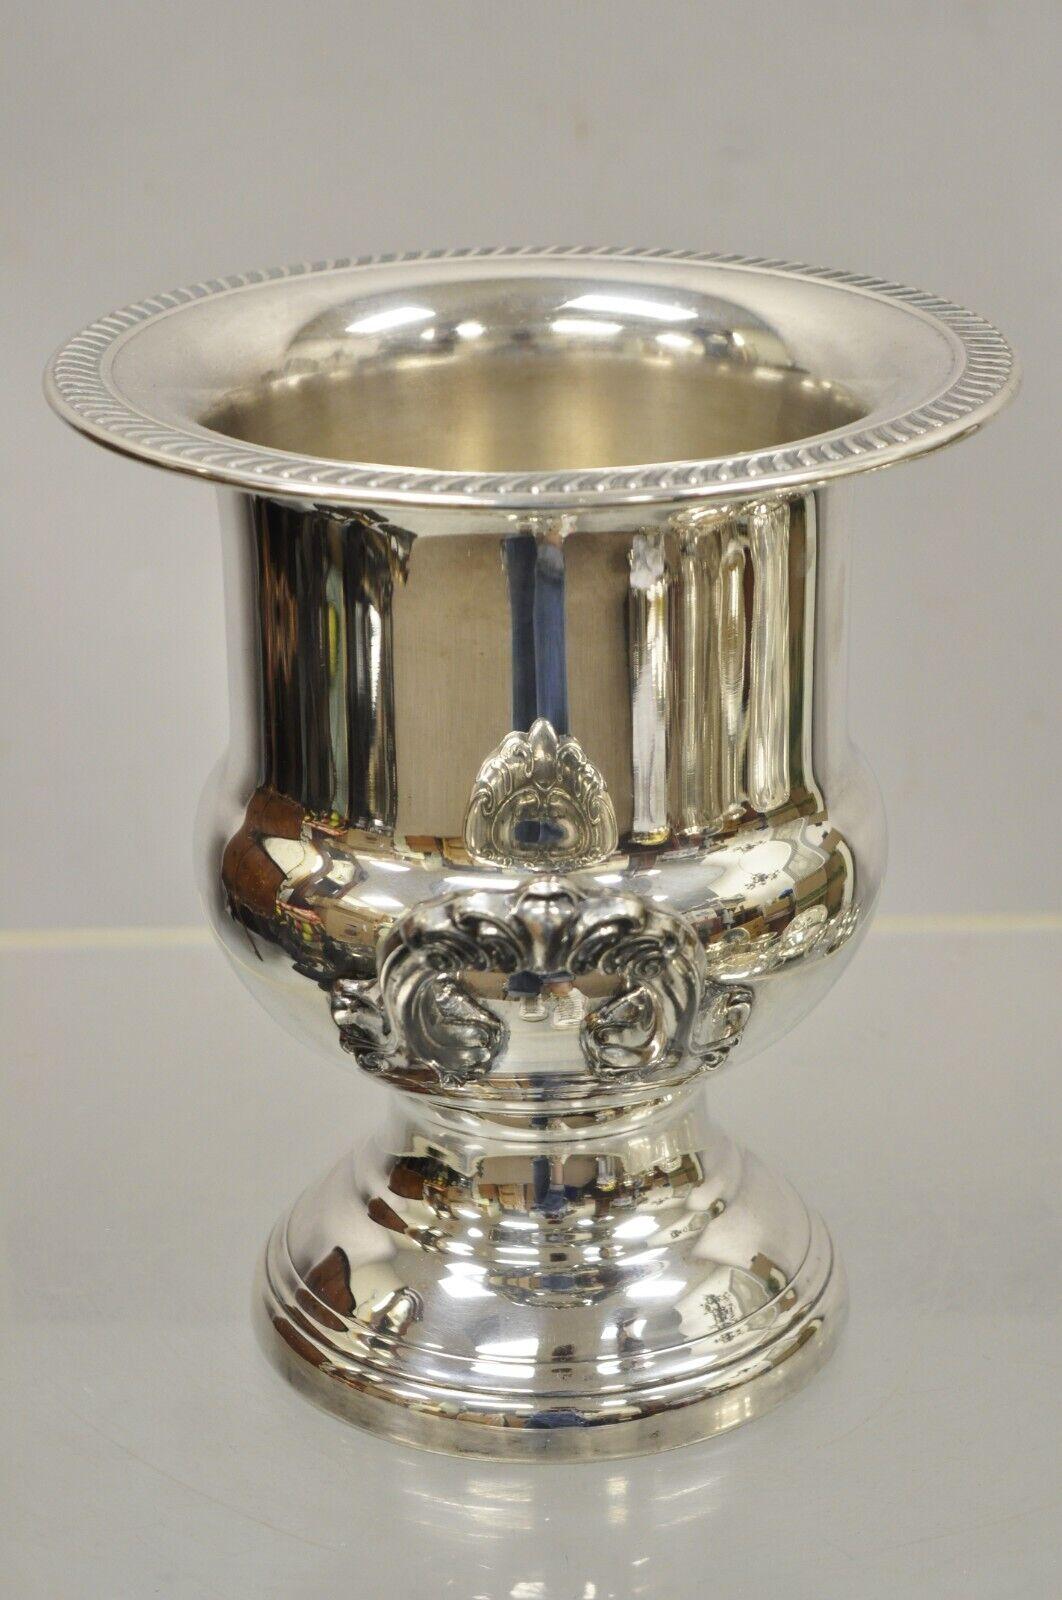 Leonard Regency Style Silver Plated Trophy cup champagne chiller ice bucket. Circa mid to late 20th century. Measurements: 10